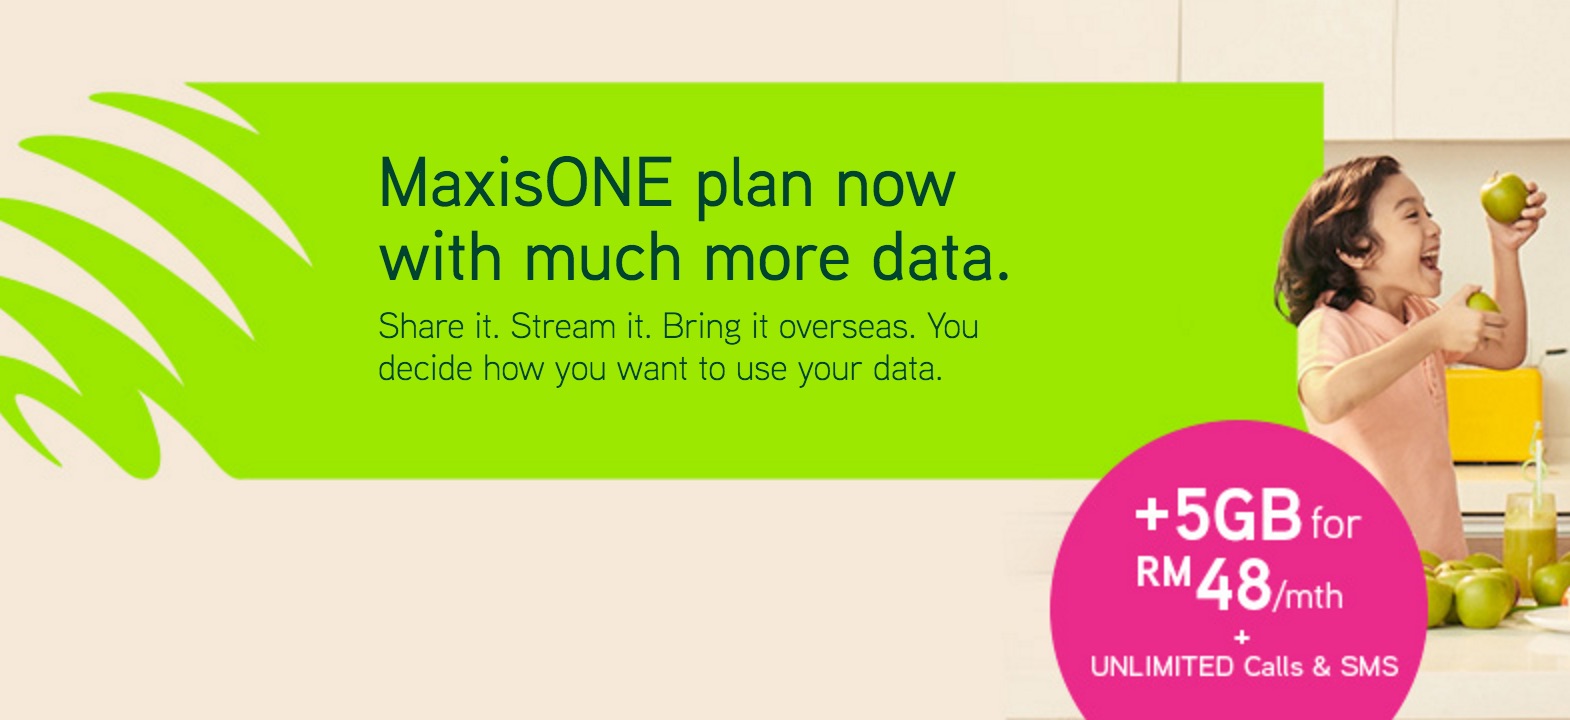 New MaxisONE Plan – 5GB for RM98